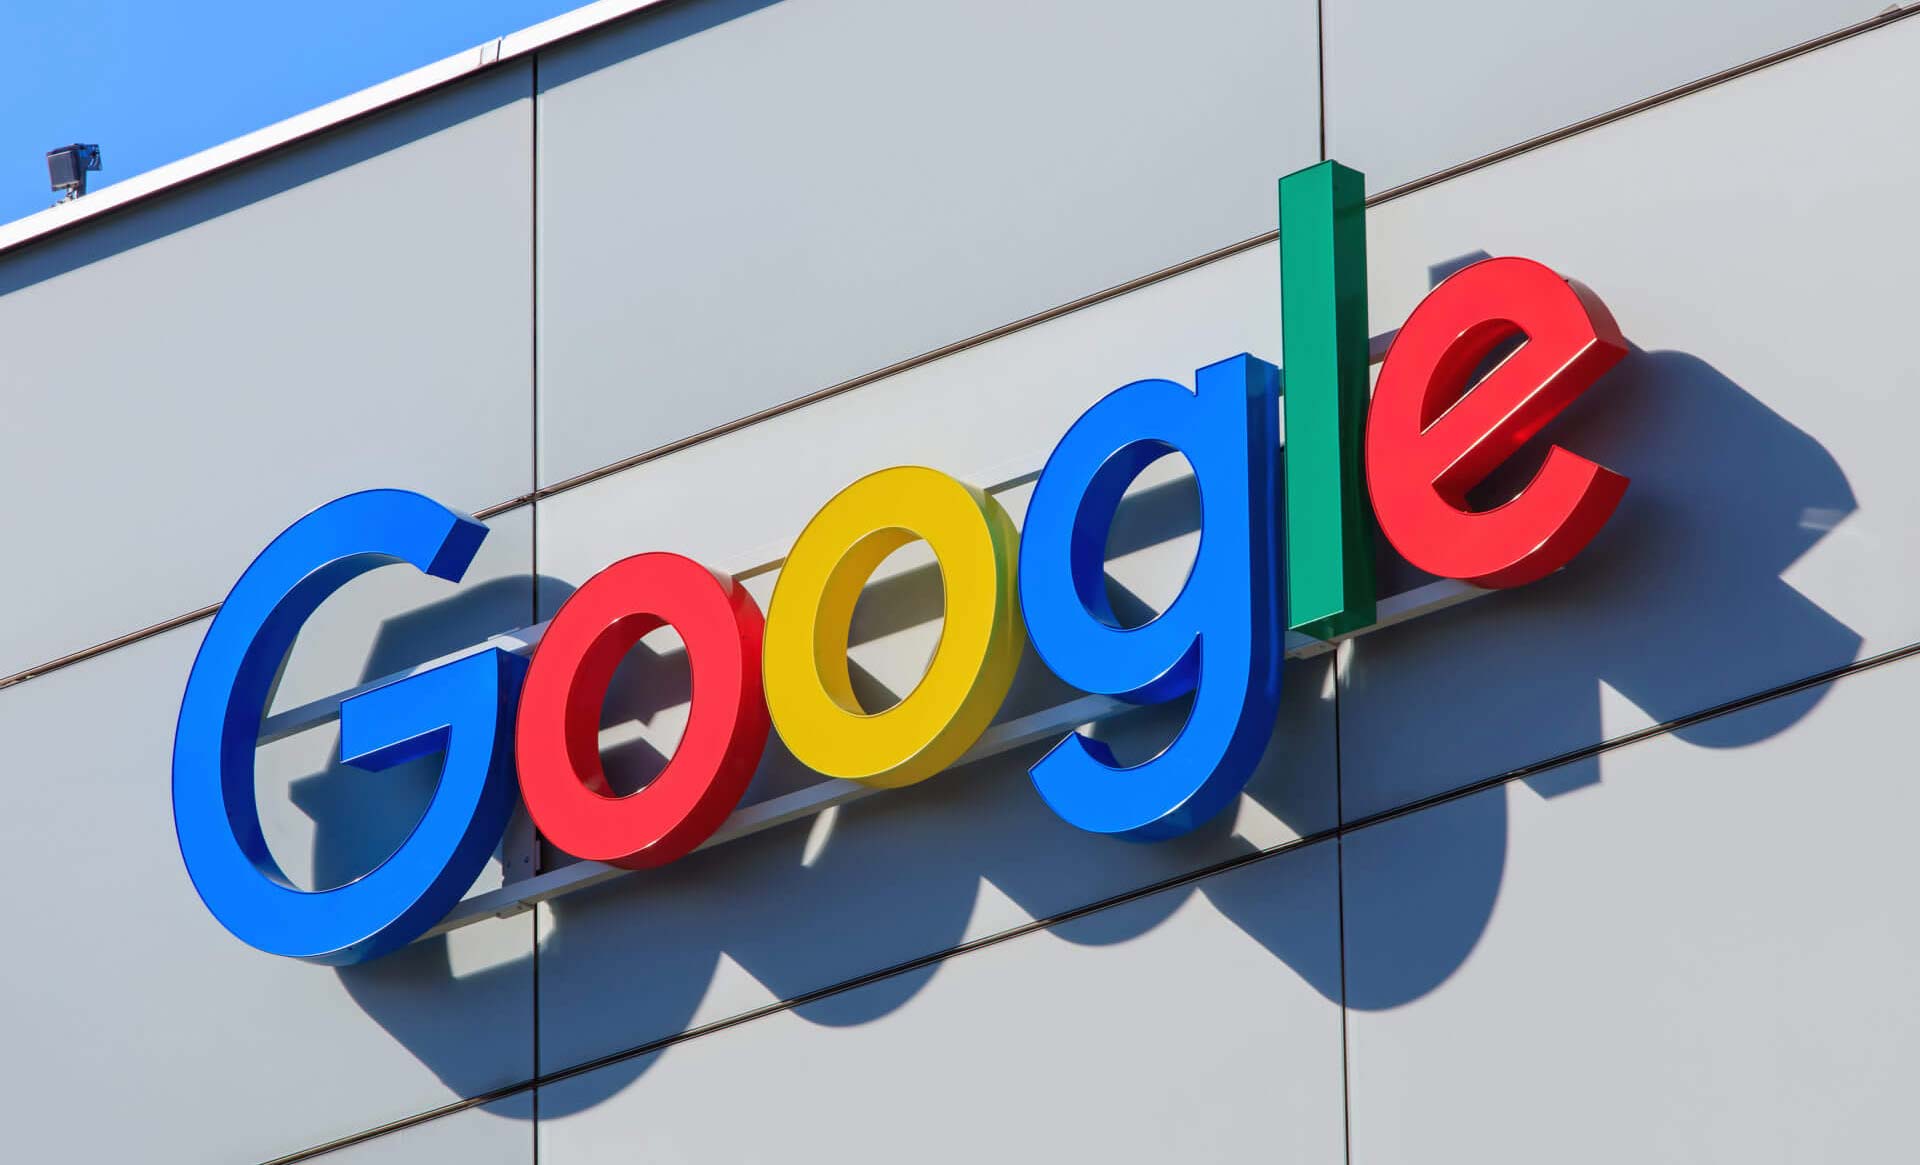 Google won't hire you if you include these 2 things in your resume, ex-Google HR reveals